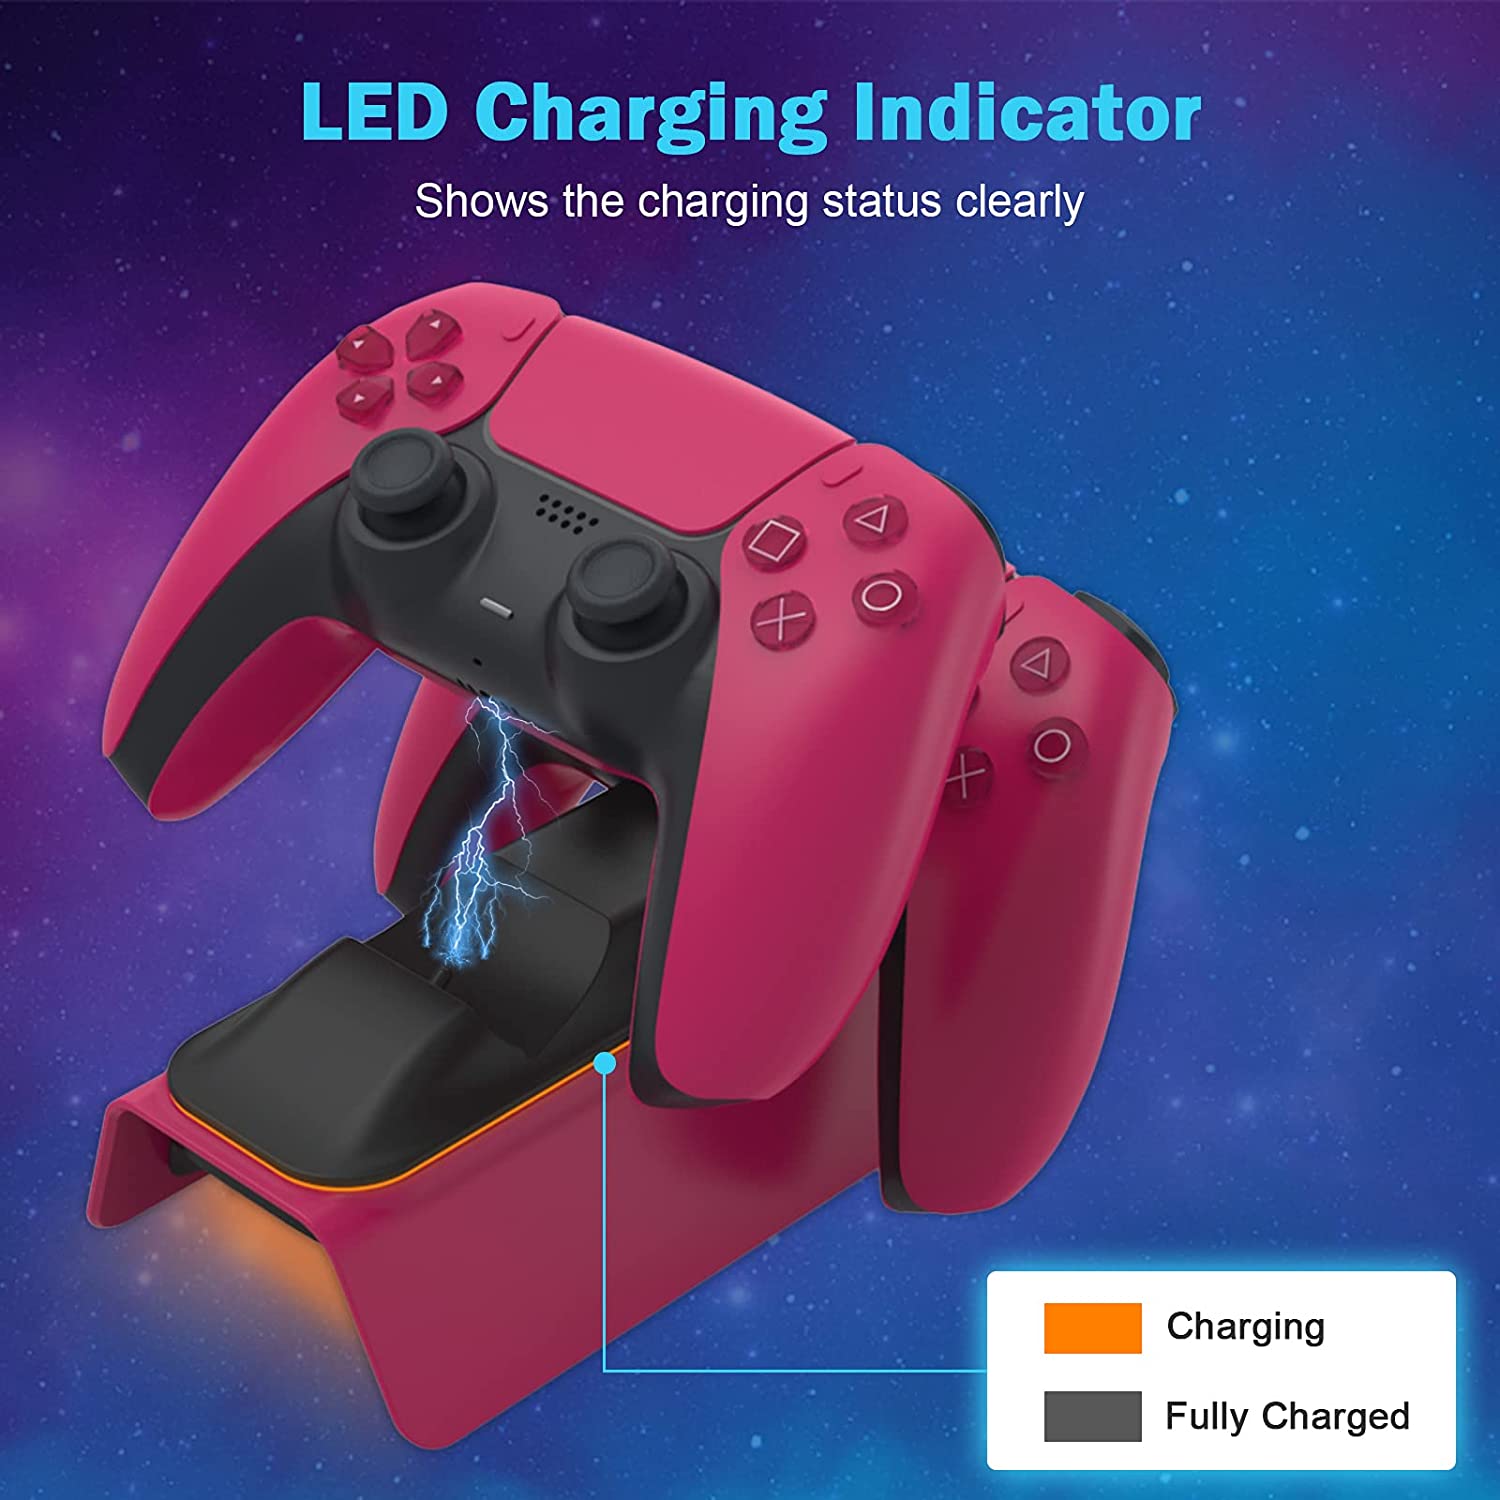 Clear LED indicators for charging status: Orange for charging, Off when fully charged.